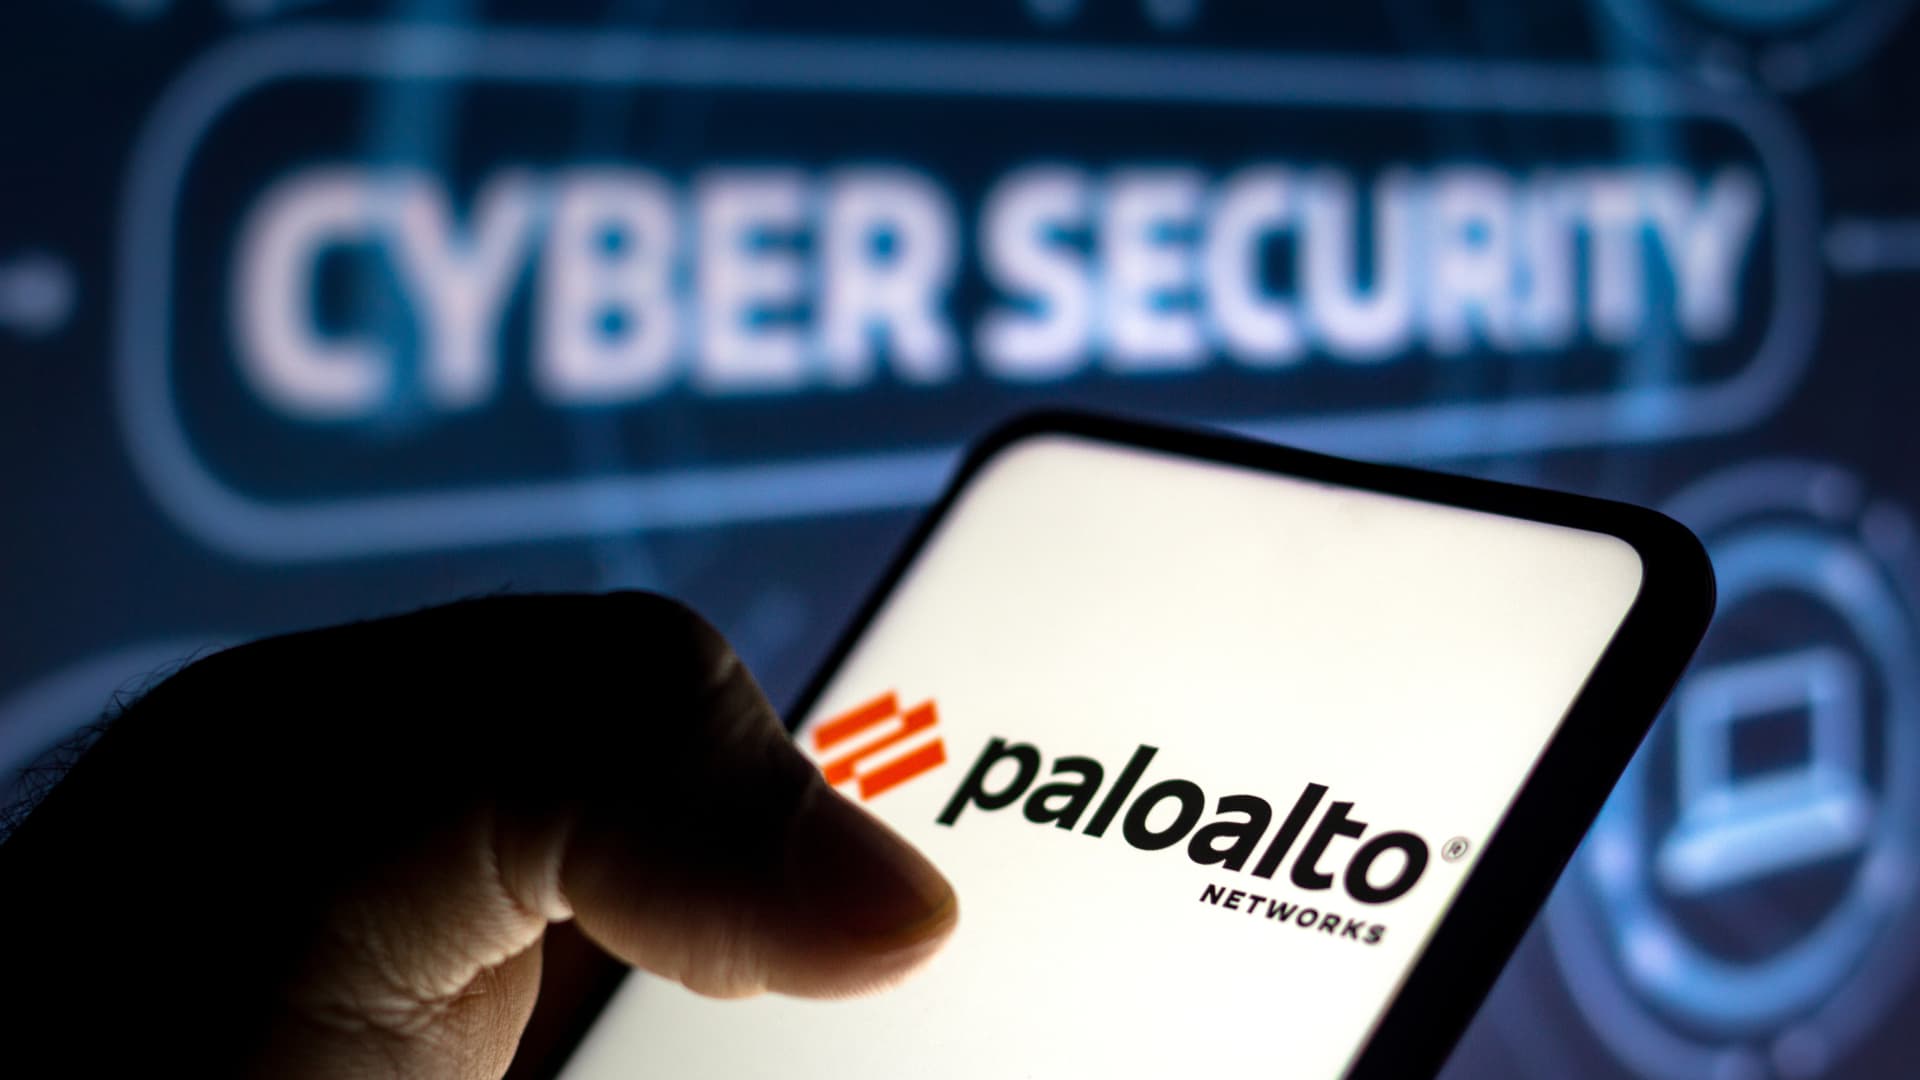 Cramer says the buying is “pure panic” over Palo Alto Networks' post-earnings decline